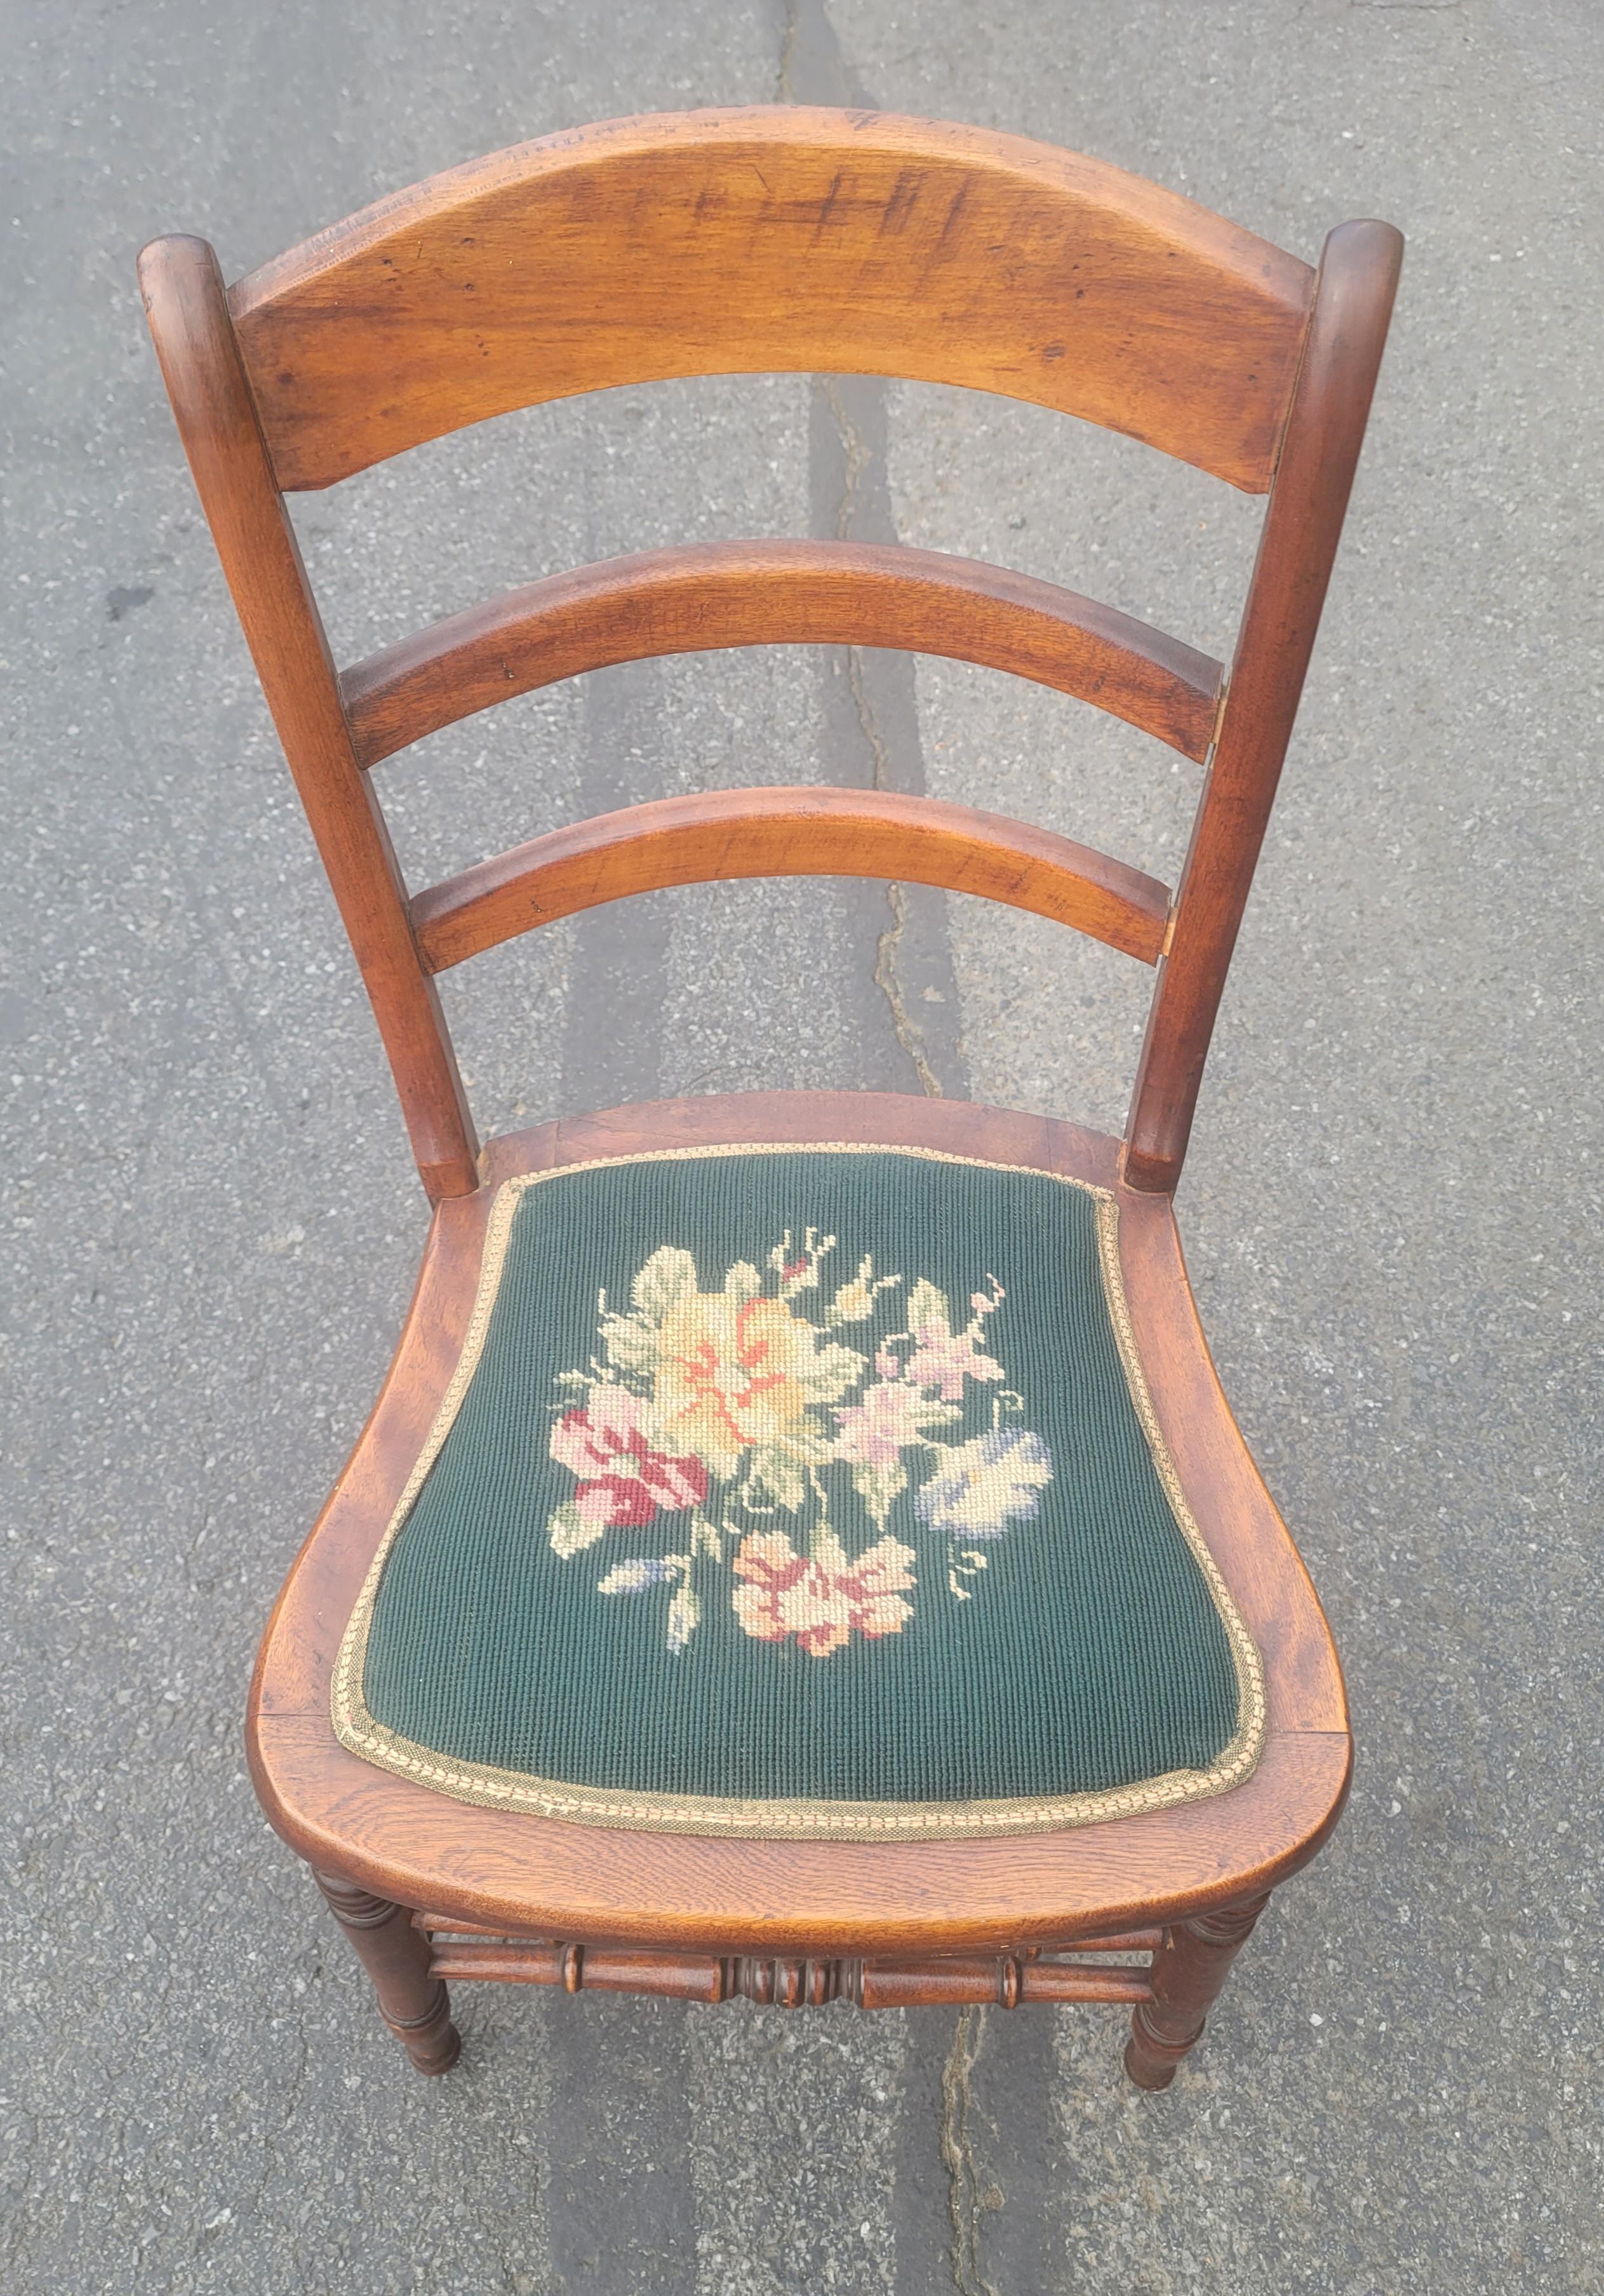 Early 20th Century Victorian Ladder Back Walnut and Needlepoint Seat Side Chairs In Good Condition For Sale In Germantown, MD